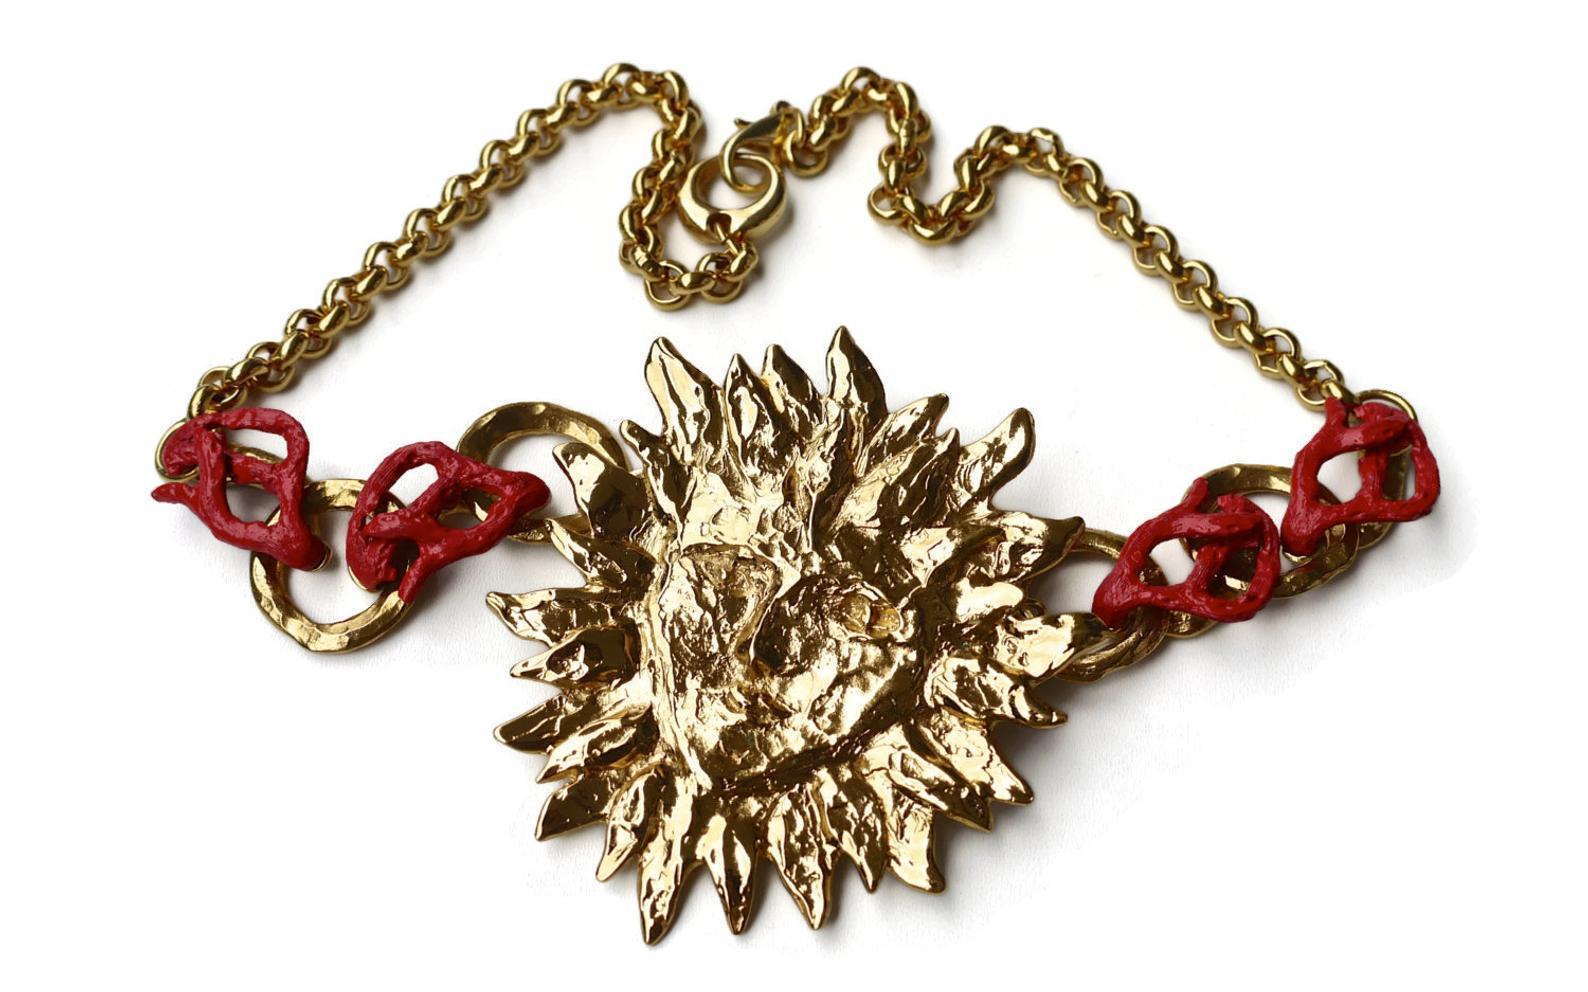 Vintage YVES SAINT LAURENT Sun Face Coral Necklace by Robert Goossens

Measurements:
Height: 8.5 cms
Width: 8 cms
Length: 57 cms 

This Vintage YVES SAINT LAURENT Sun Face Coral Necklace is RARE and such a collector item. This was designed by Robert